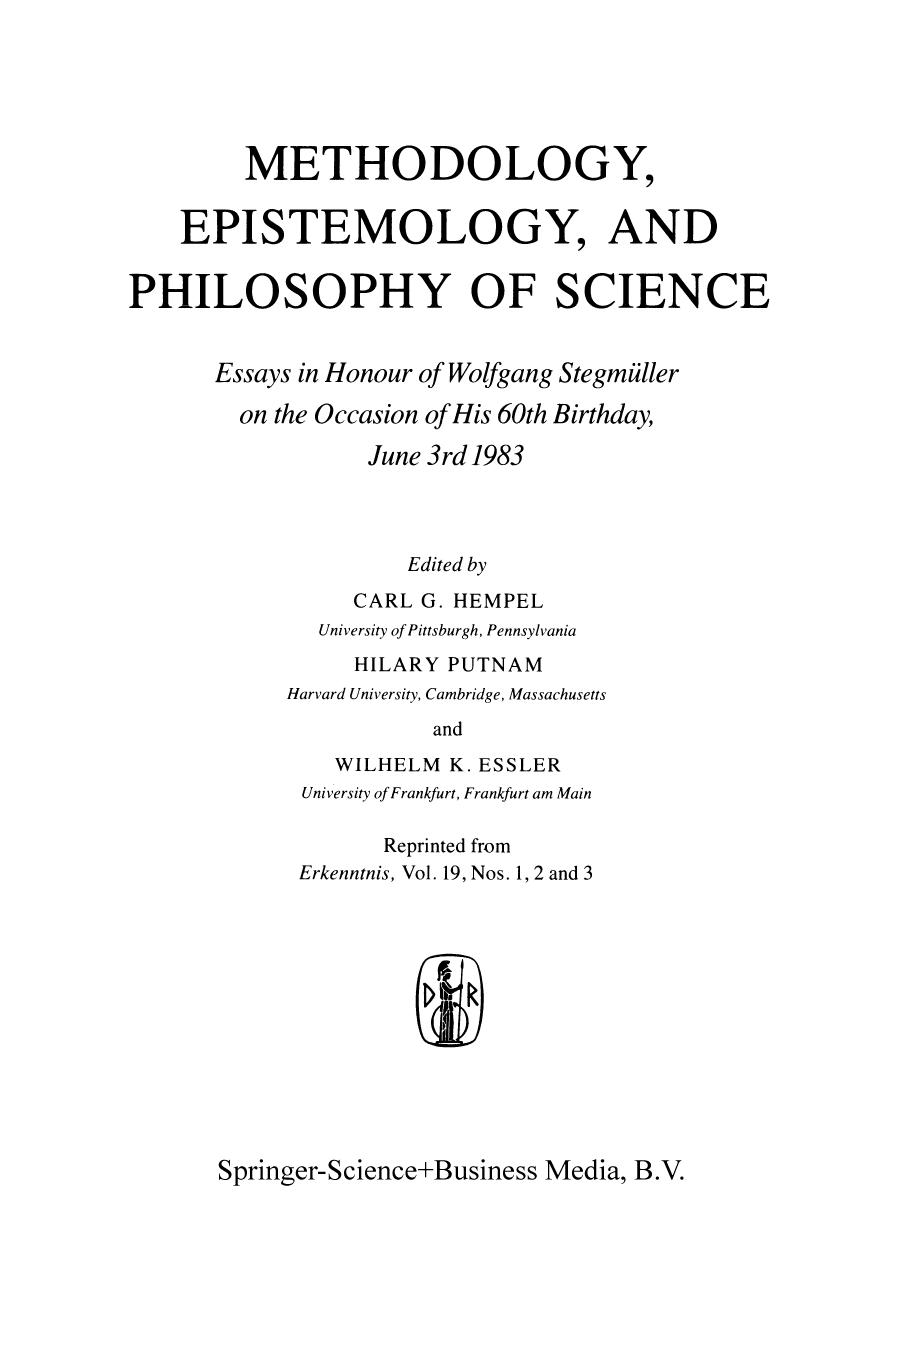 Methodology, Epistemology, and Philosophy of Science: Essays in Honour of Wolfgang Stegmüller on the Occasion of His 60th B Irth Day, June 3rd, 1983. Reprinted From the Journal Erkenntnis, Vol. 19, Nos 1,2 and 3